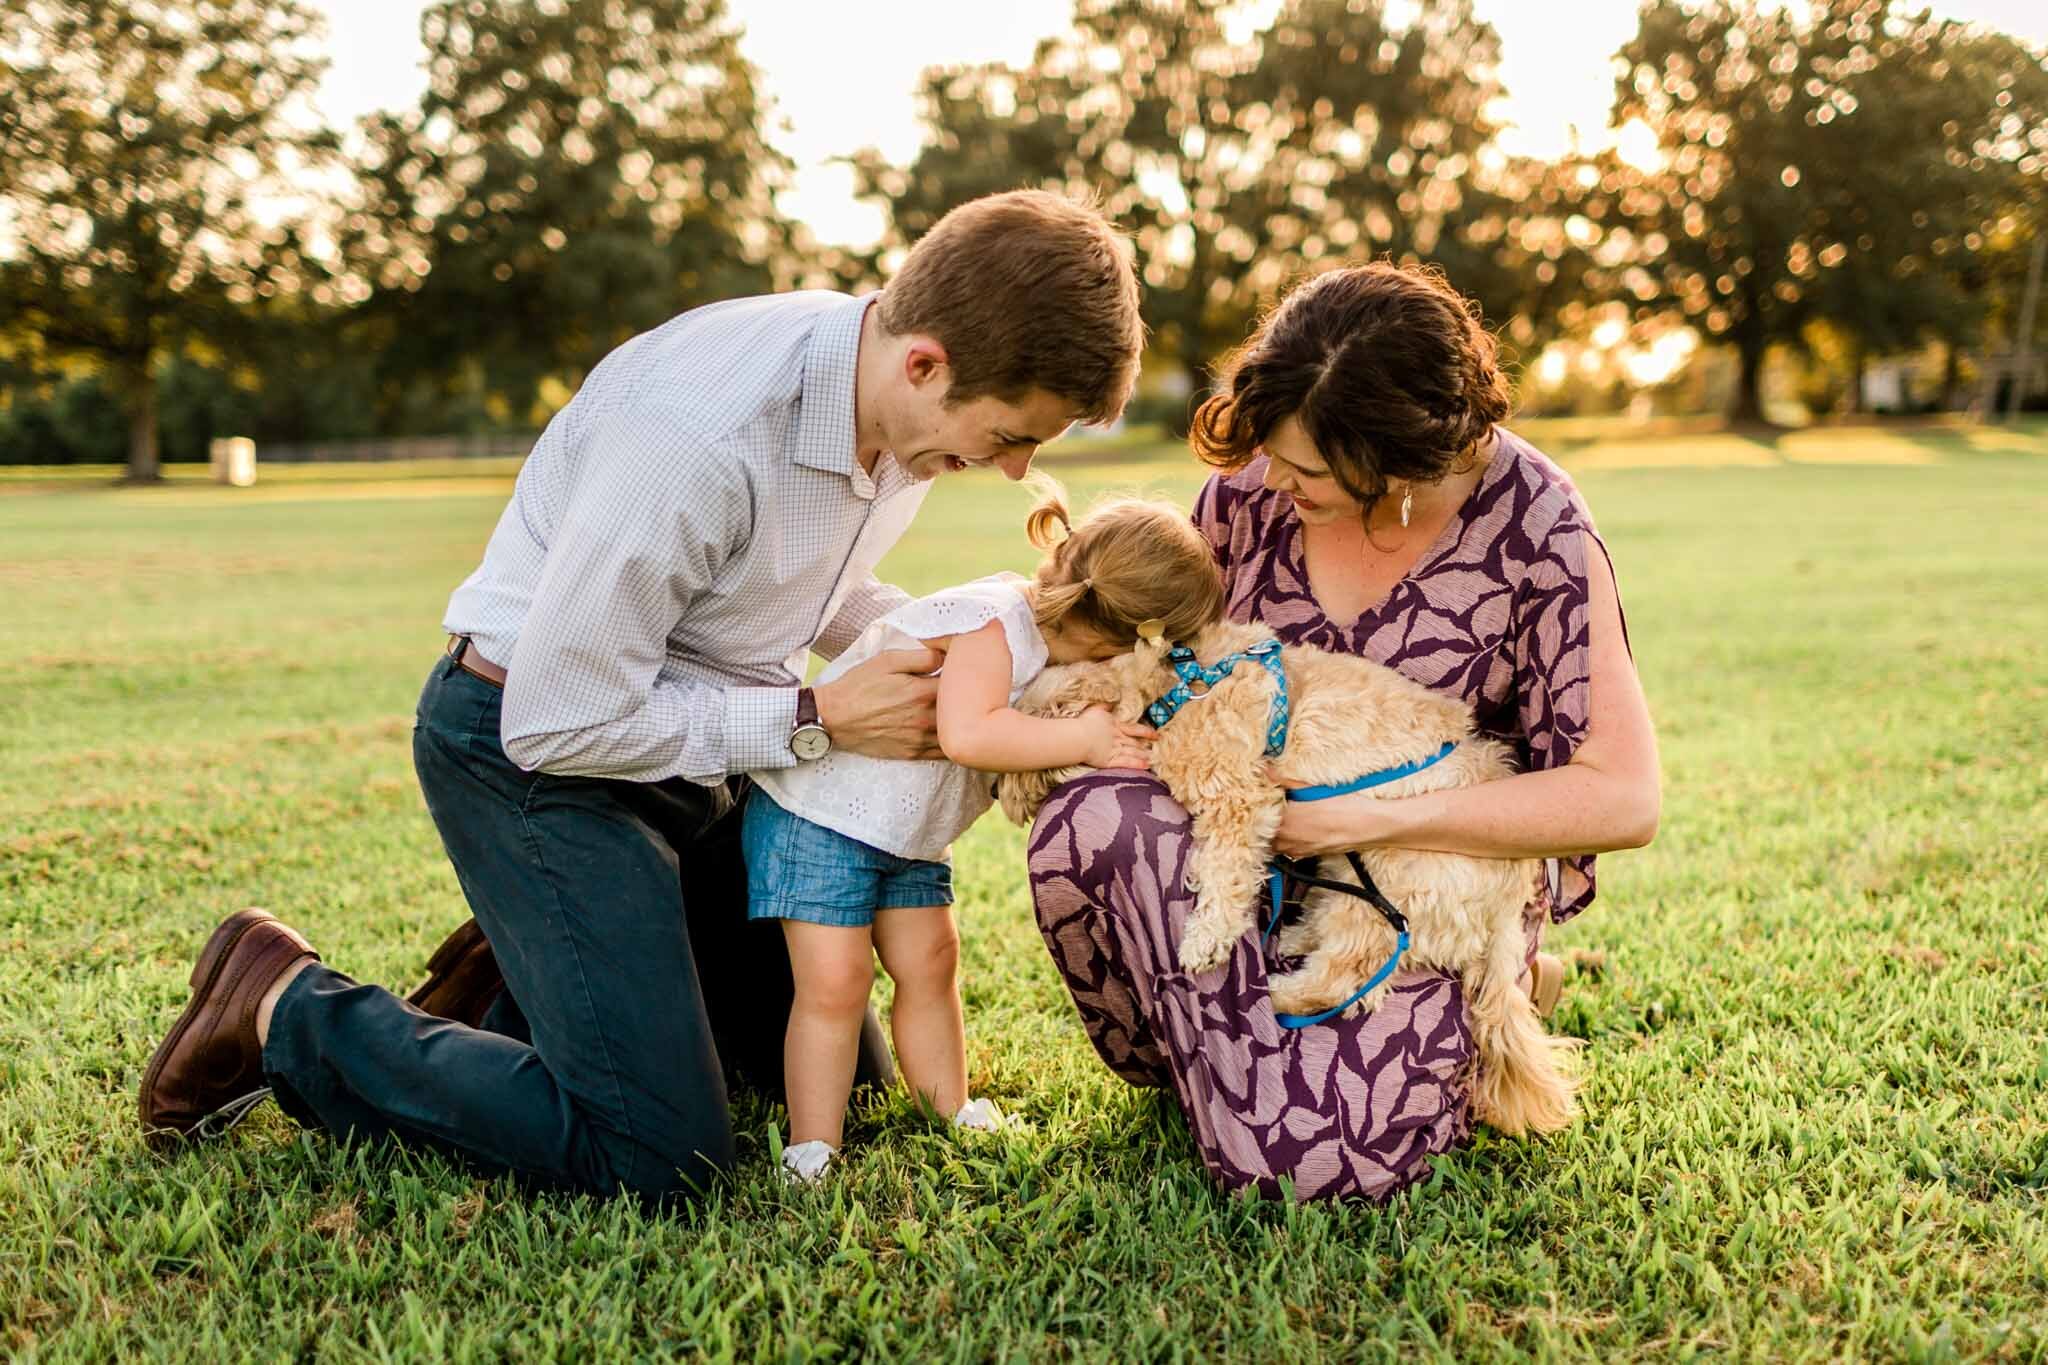 Family laughing together outside | Family Photography at Dix Park Raleigh | By G. Lin Photography